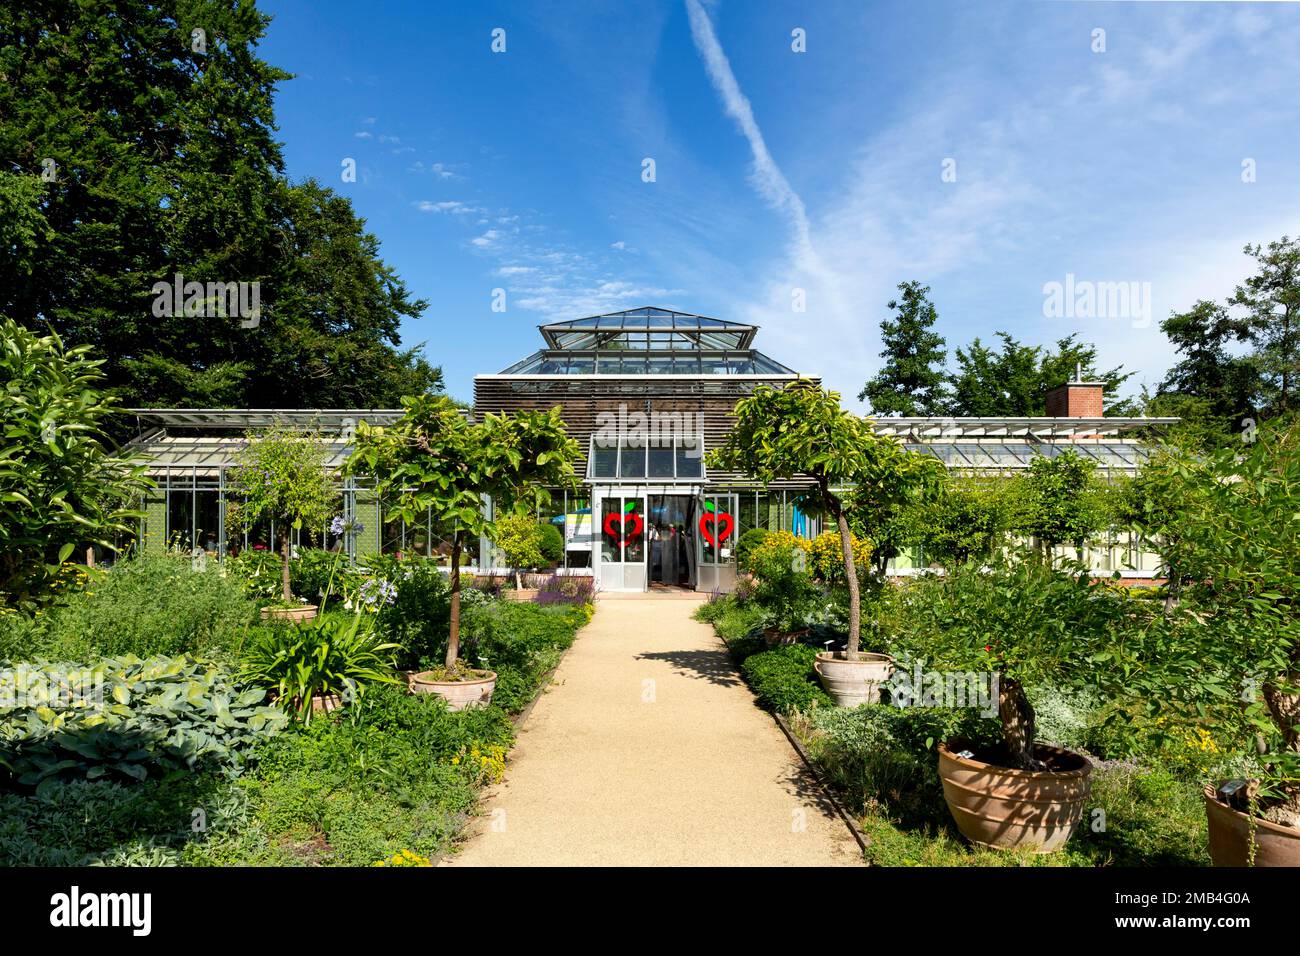 Palm house with cafe in the botanical garden, Stadtpark, Guetersloh, East Westphalia, North Rhine-Westphalia, Germany Stock Photo